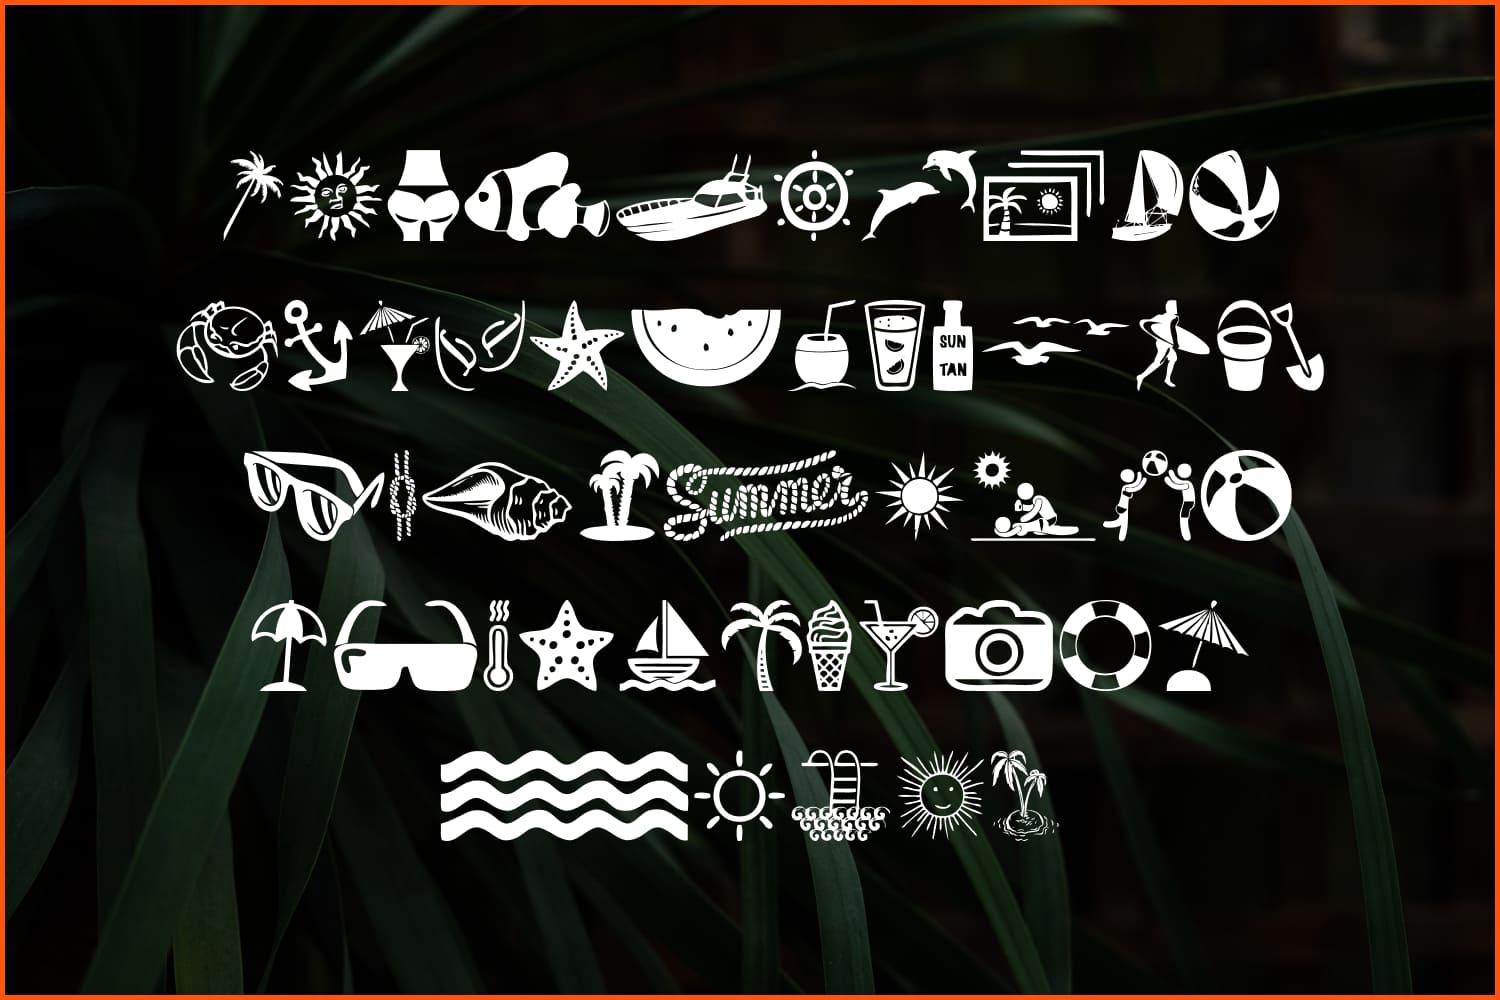 Collage of white icons on a beach theme on a dark background.